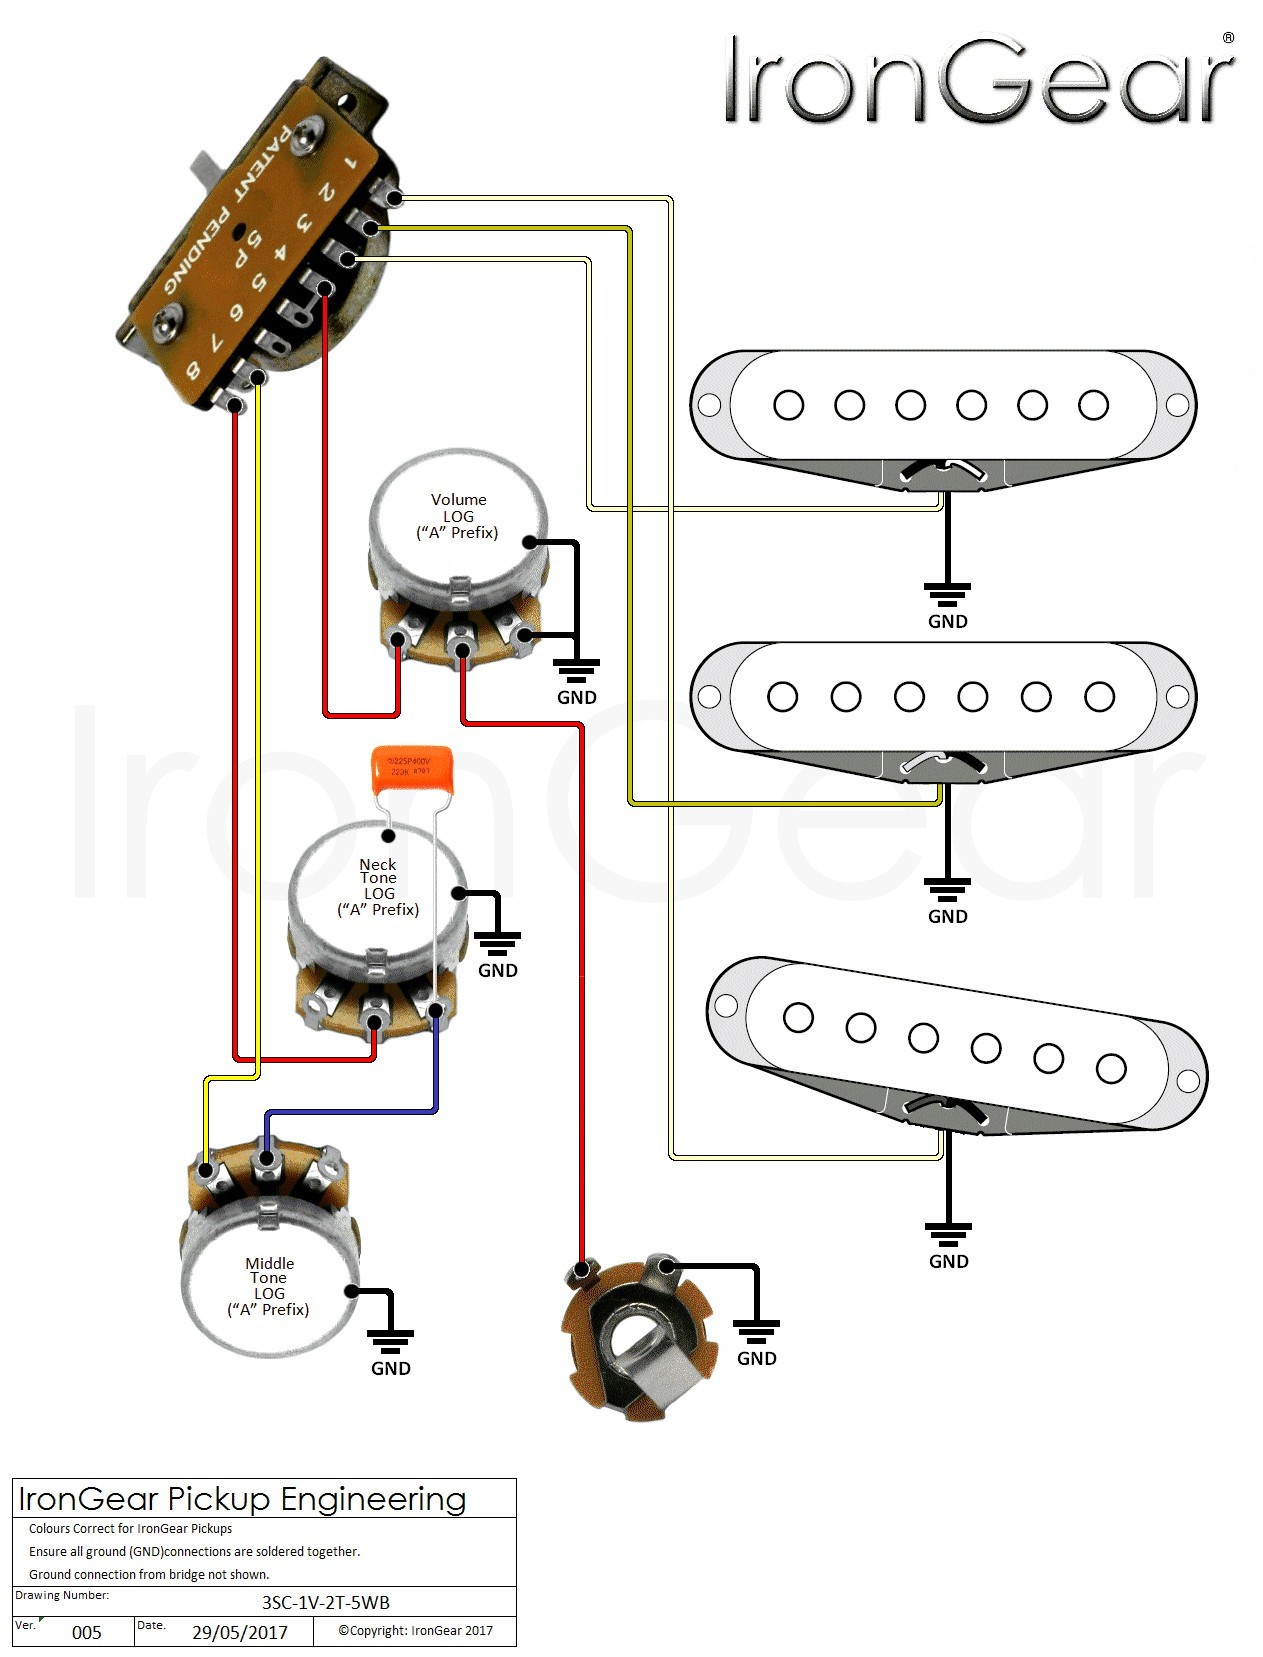 Stratocaster Wiring Diagram 3 Way Switch Save Electric Guitar Wiring Diagram E Pickup New Guitar Wiring Diagrams